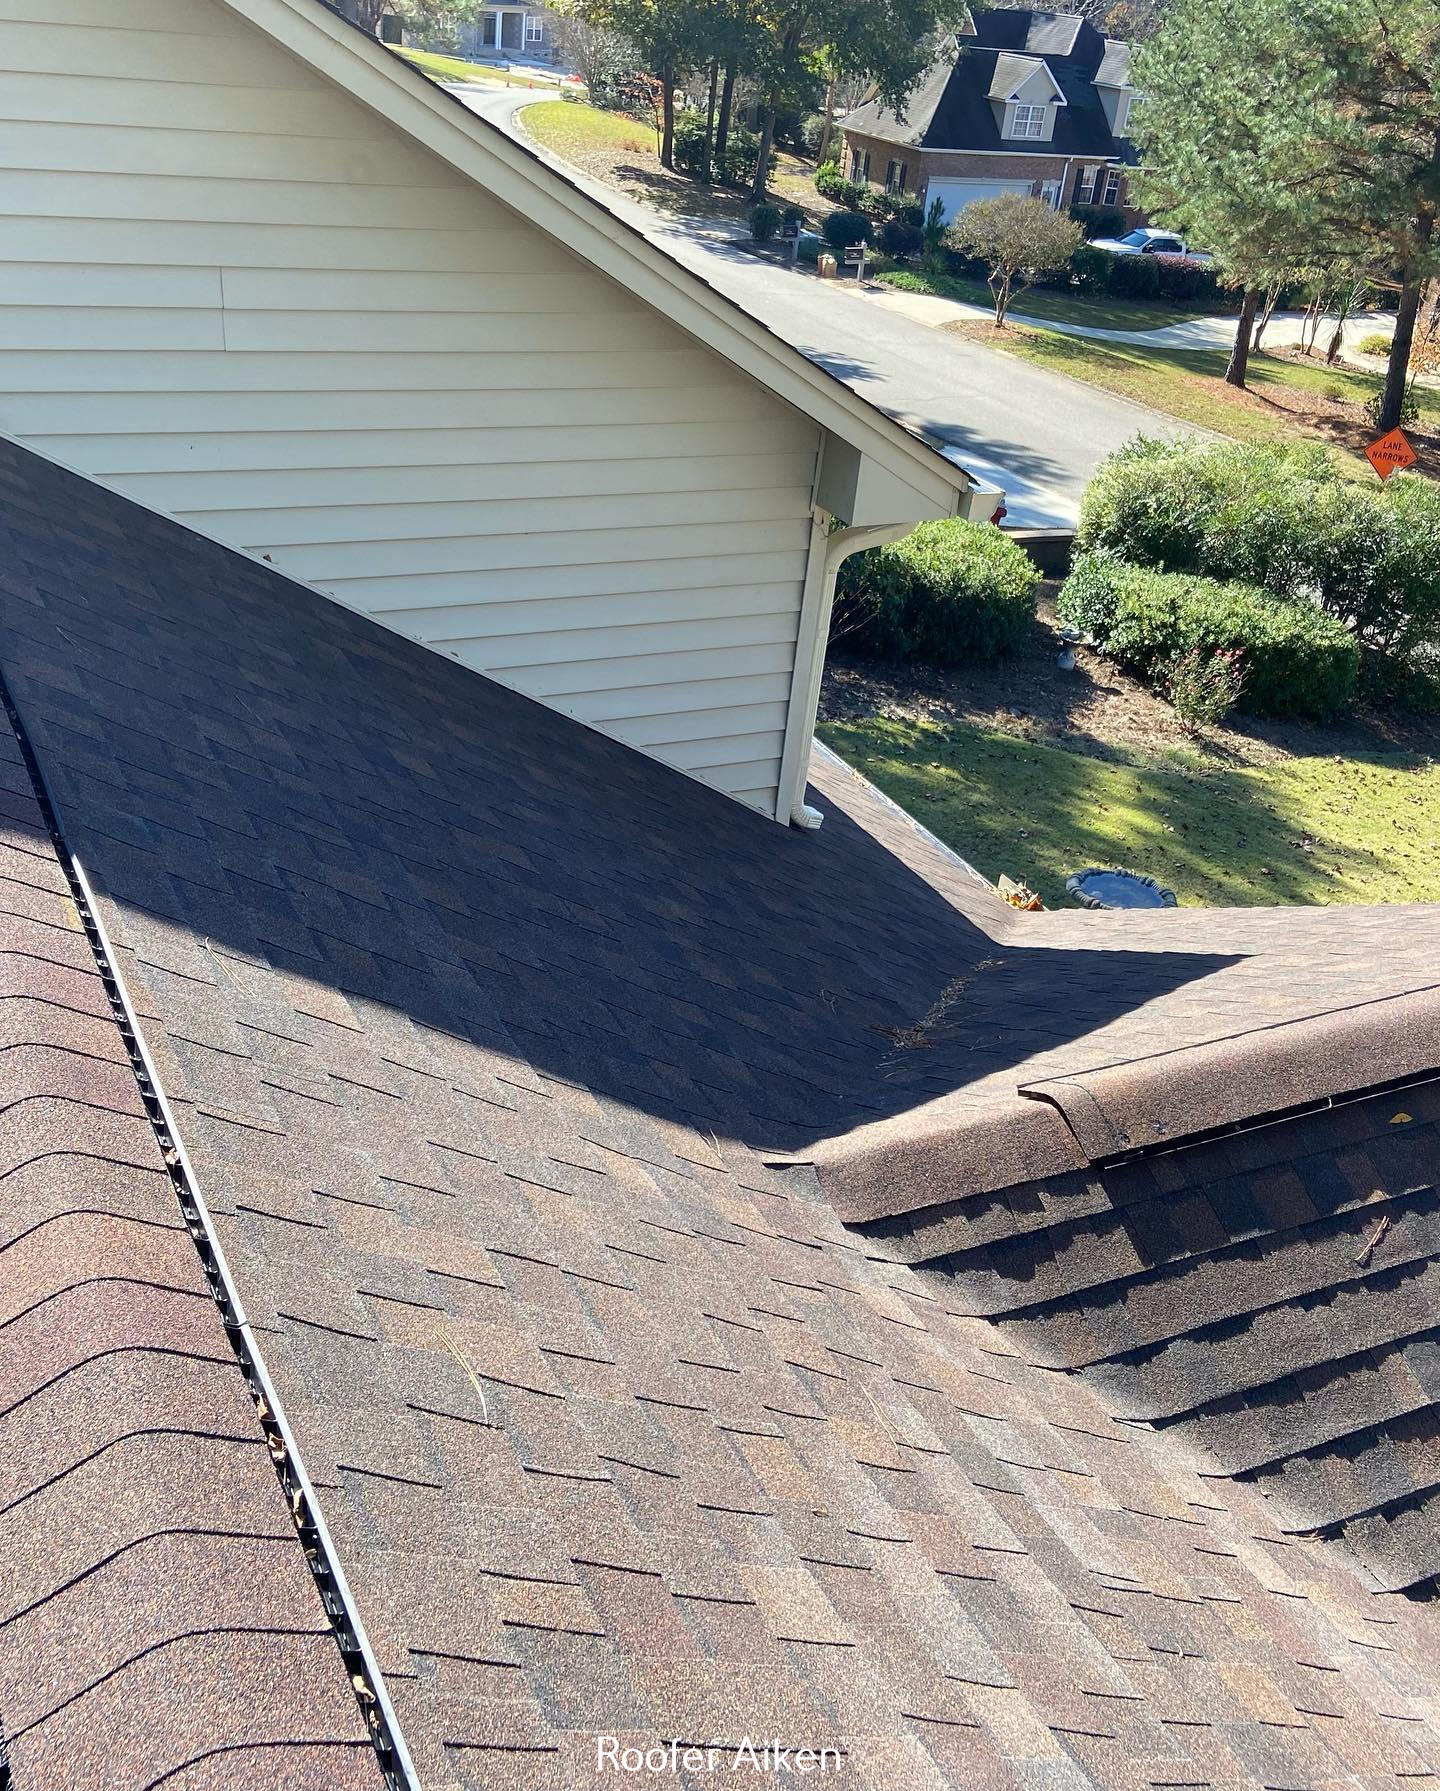 Rite Price Roofing Explains Cost-Effective Solutions for Roof Repair and Maintenance